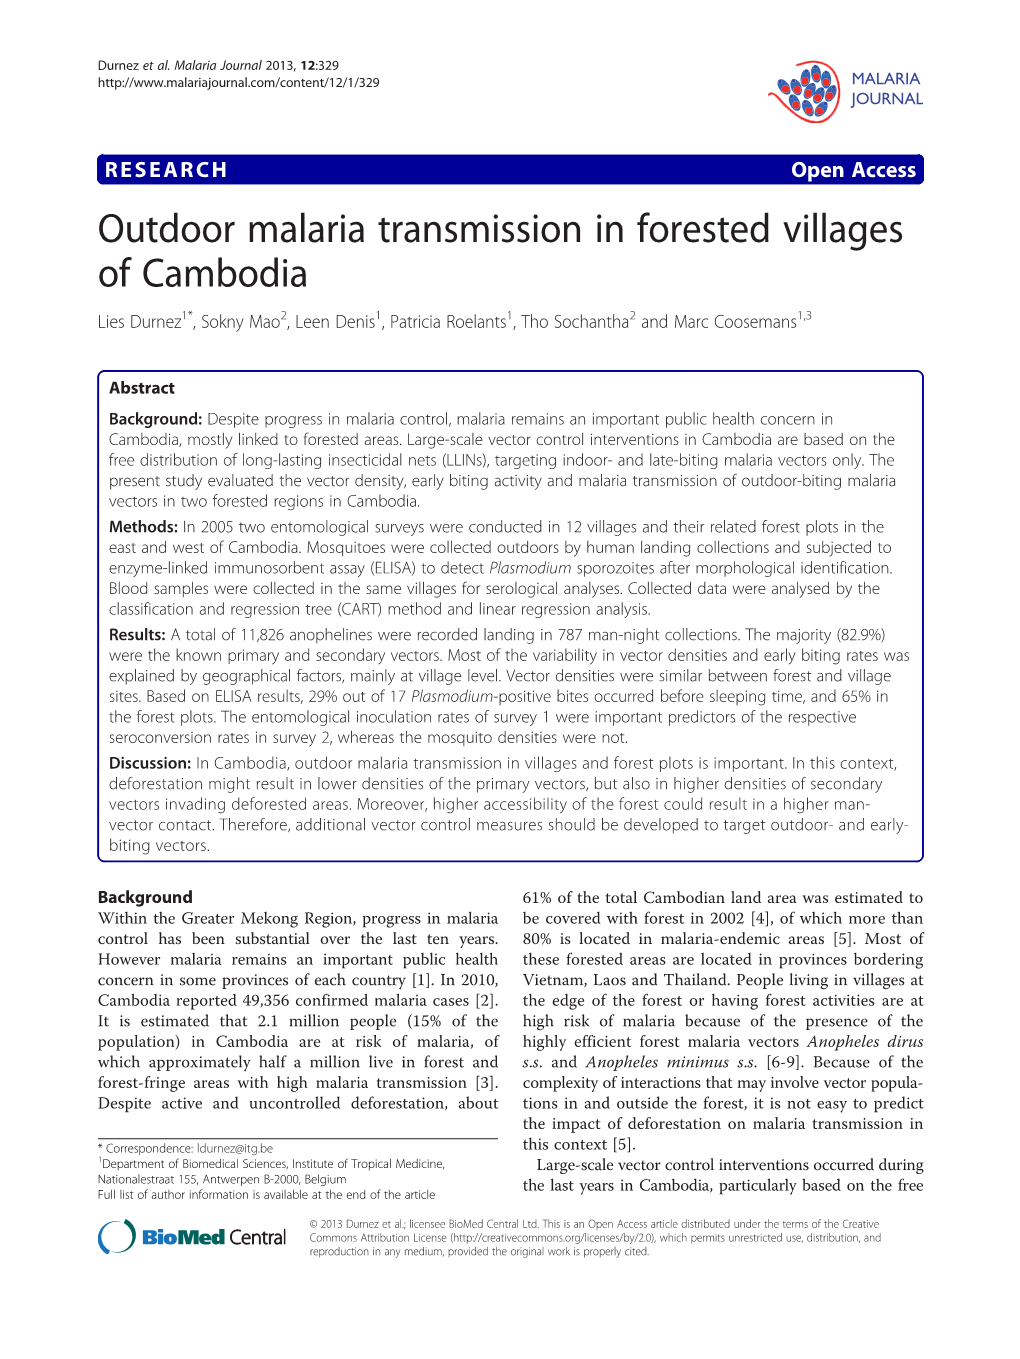 Outdoor Malaria Transmission in Forested Villages of Cambodia Lies Durnez1*, Sokny Mao2, Leen Denis1, Patricia Roelants1, Tho Sochantha2 and Marc Coosemans1,3